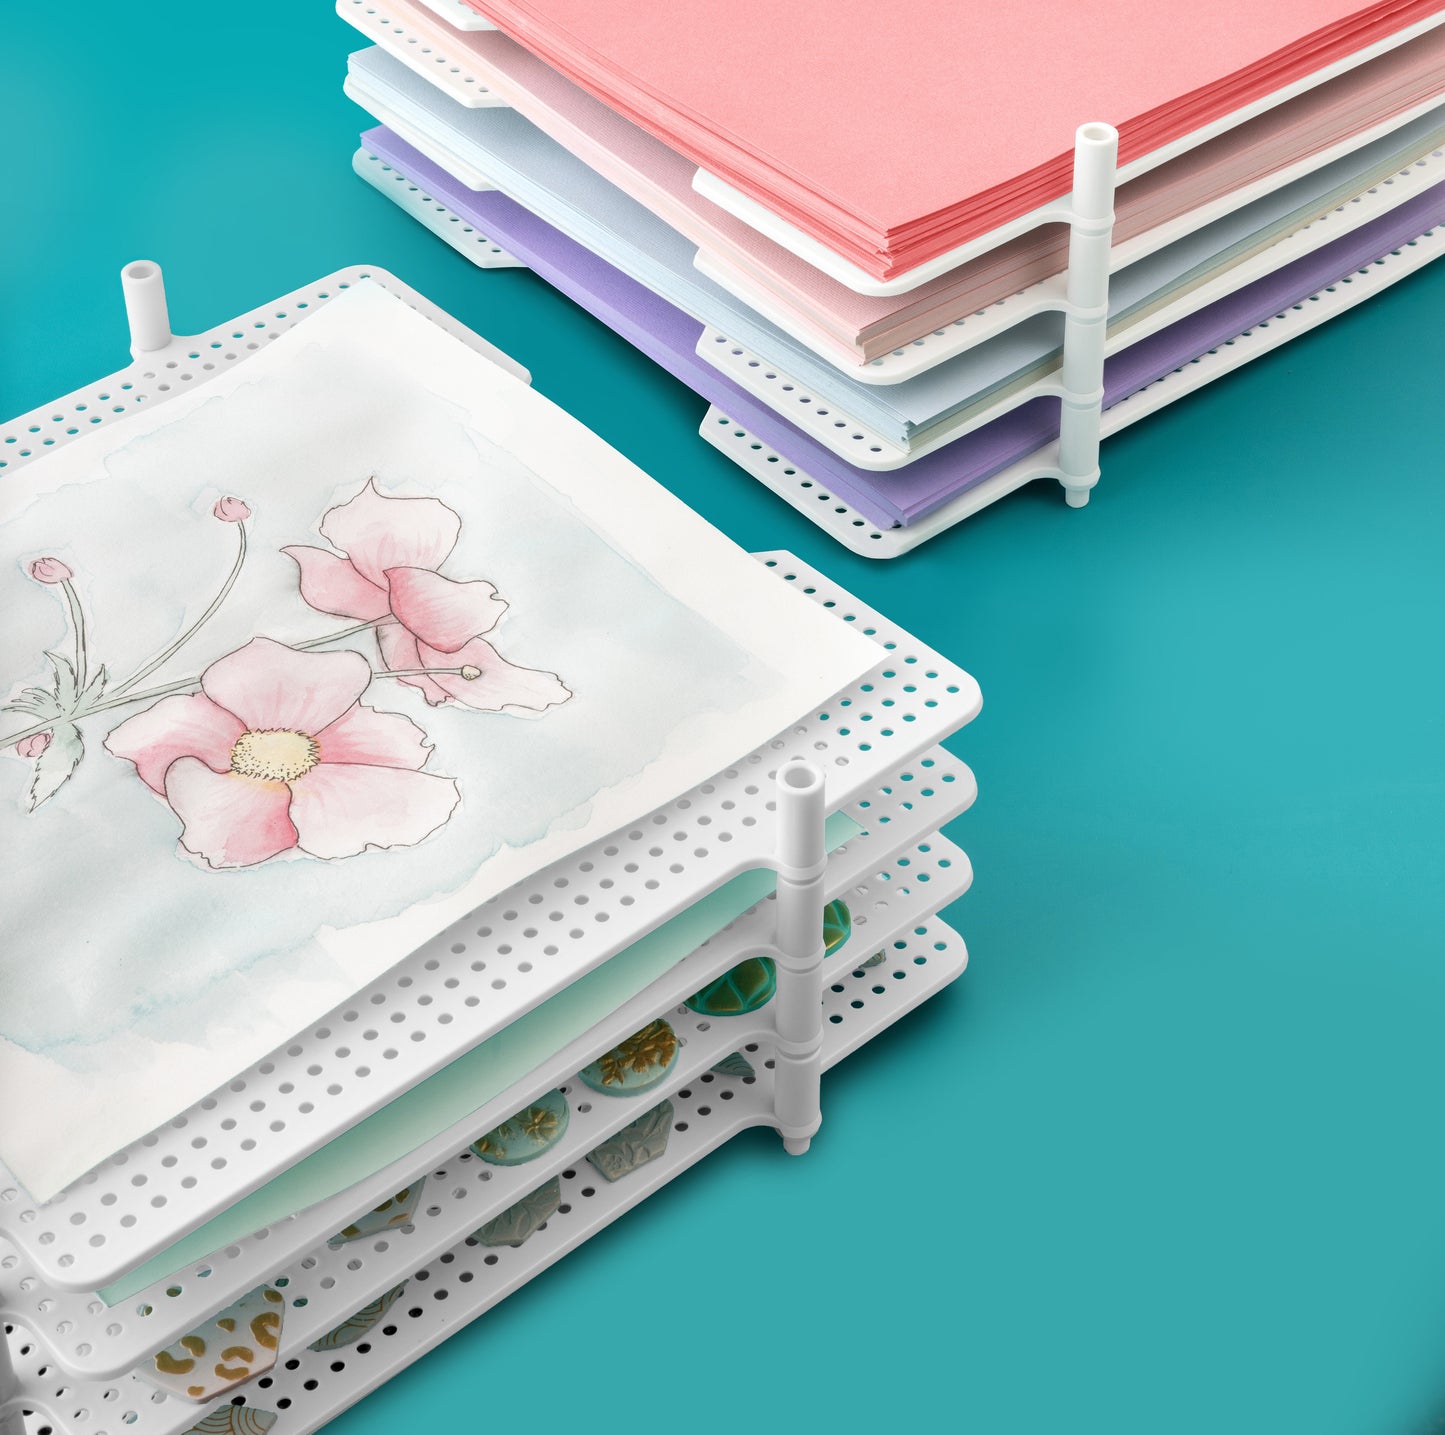 We R Memory Keepers Stackable Acrylic Paper Trays 12X12 4/Pkg-Clear  (Retail Packaged) - Stackable Acrylic Paper Trays 12X12 4/Pkg-Clear  (Retail Packaged) . shop for We R Memory Keepers products in India.